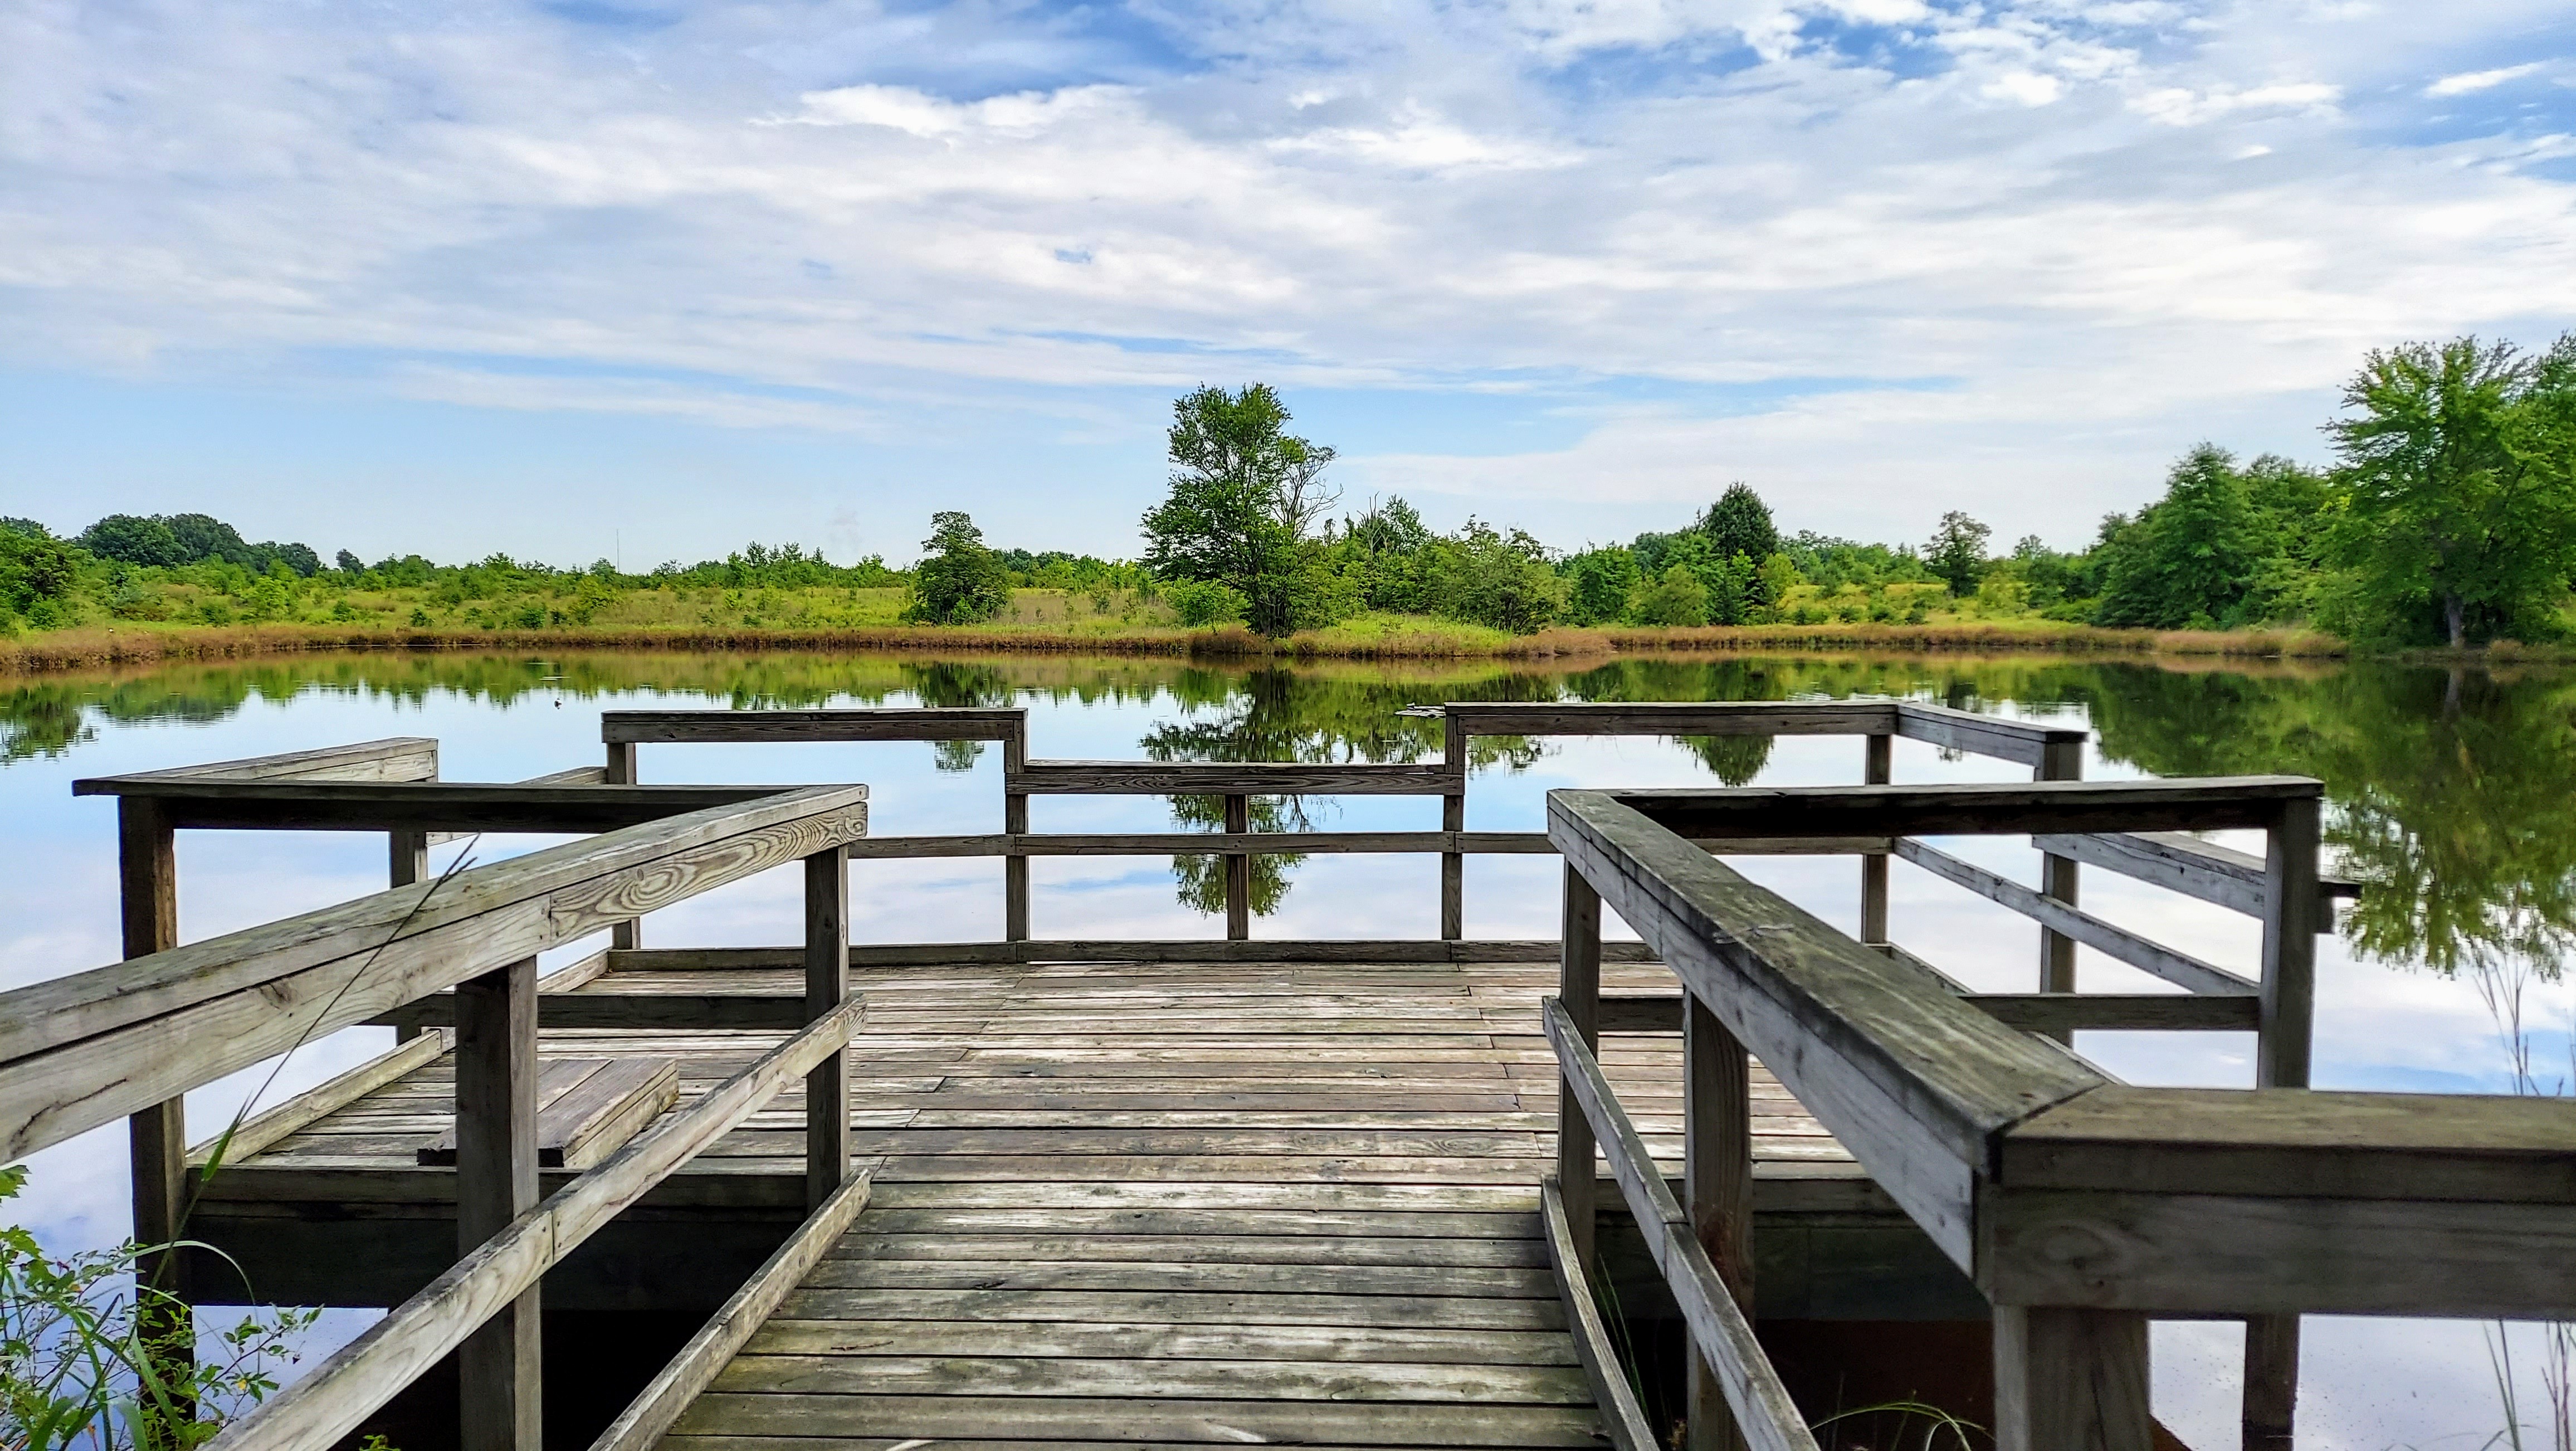 A view of the dock by Painted Turtle Pond at Occoquan Bay NWR